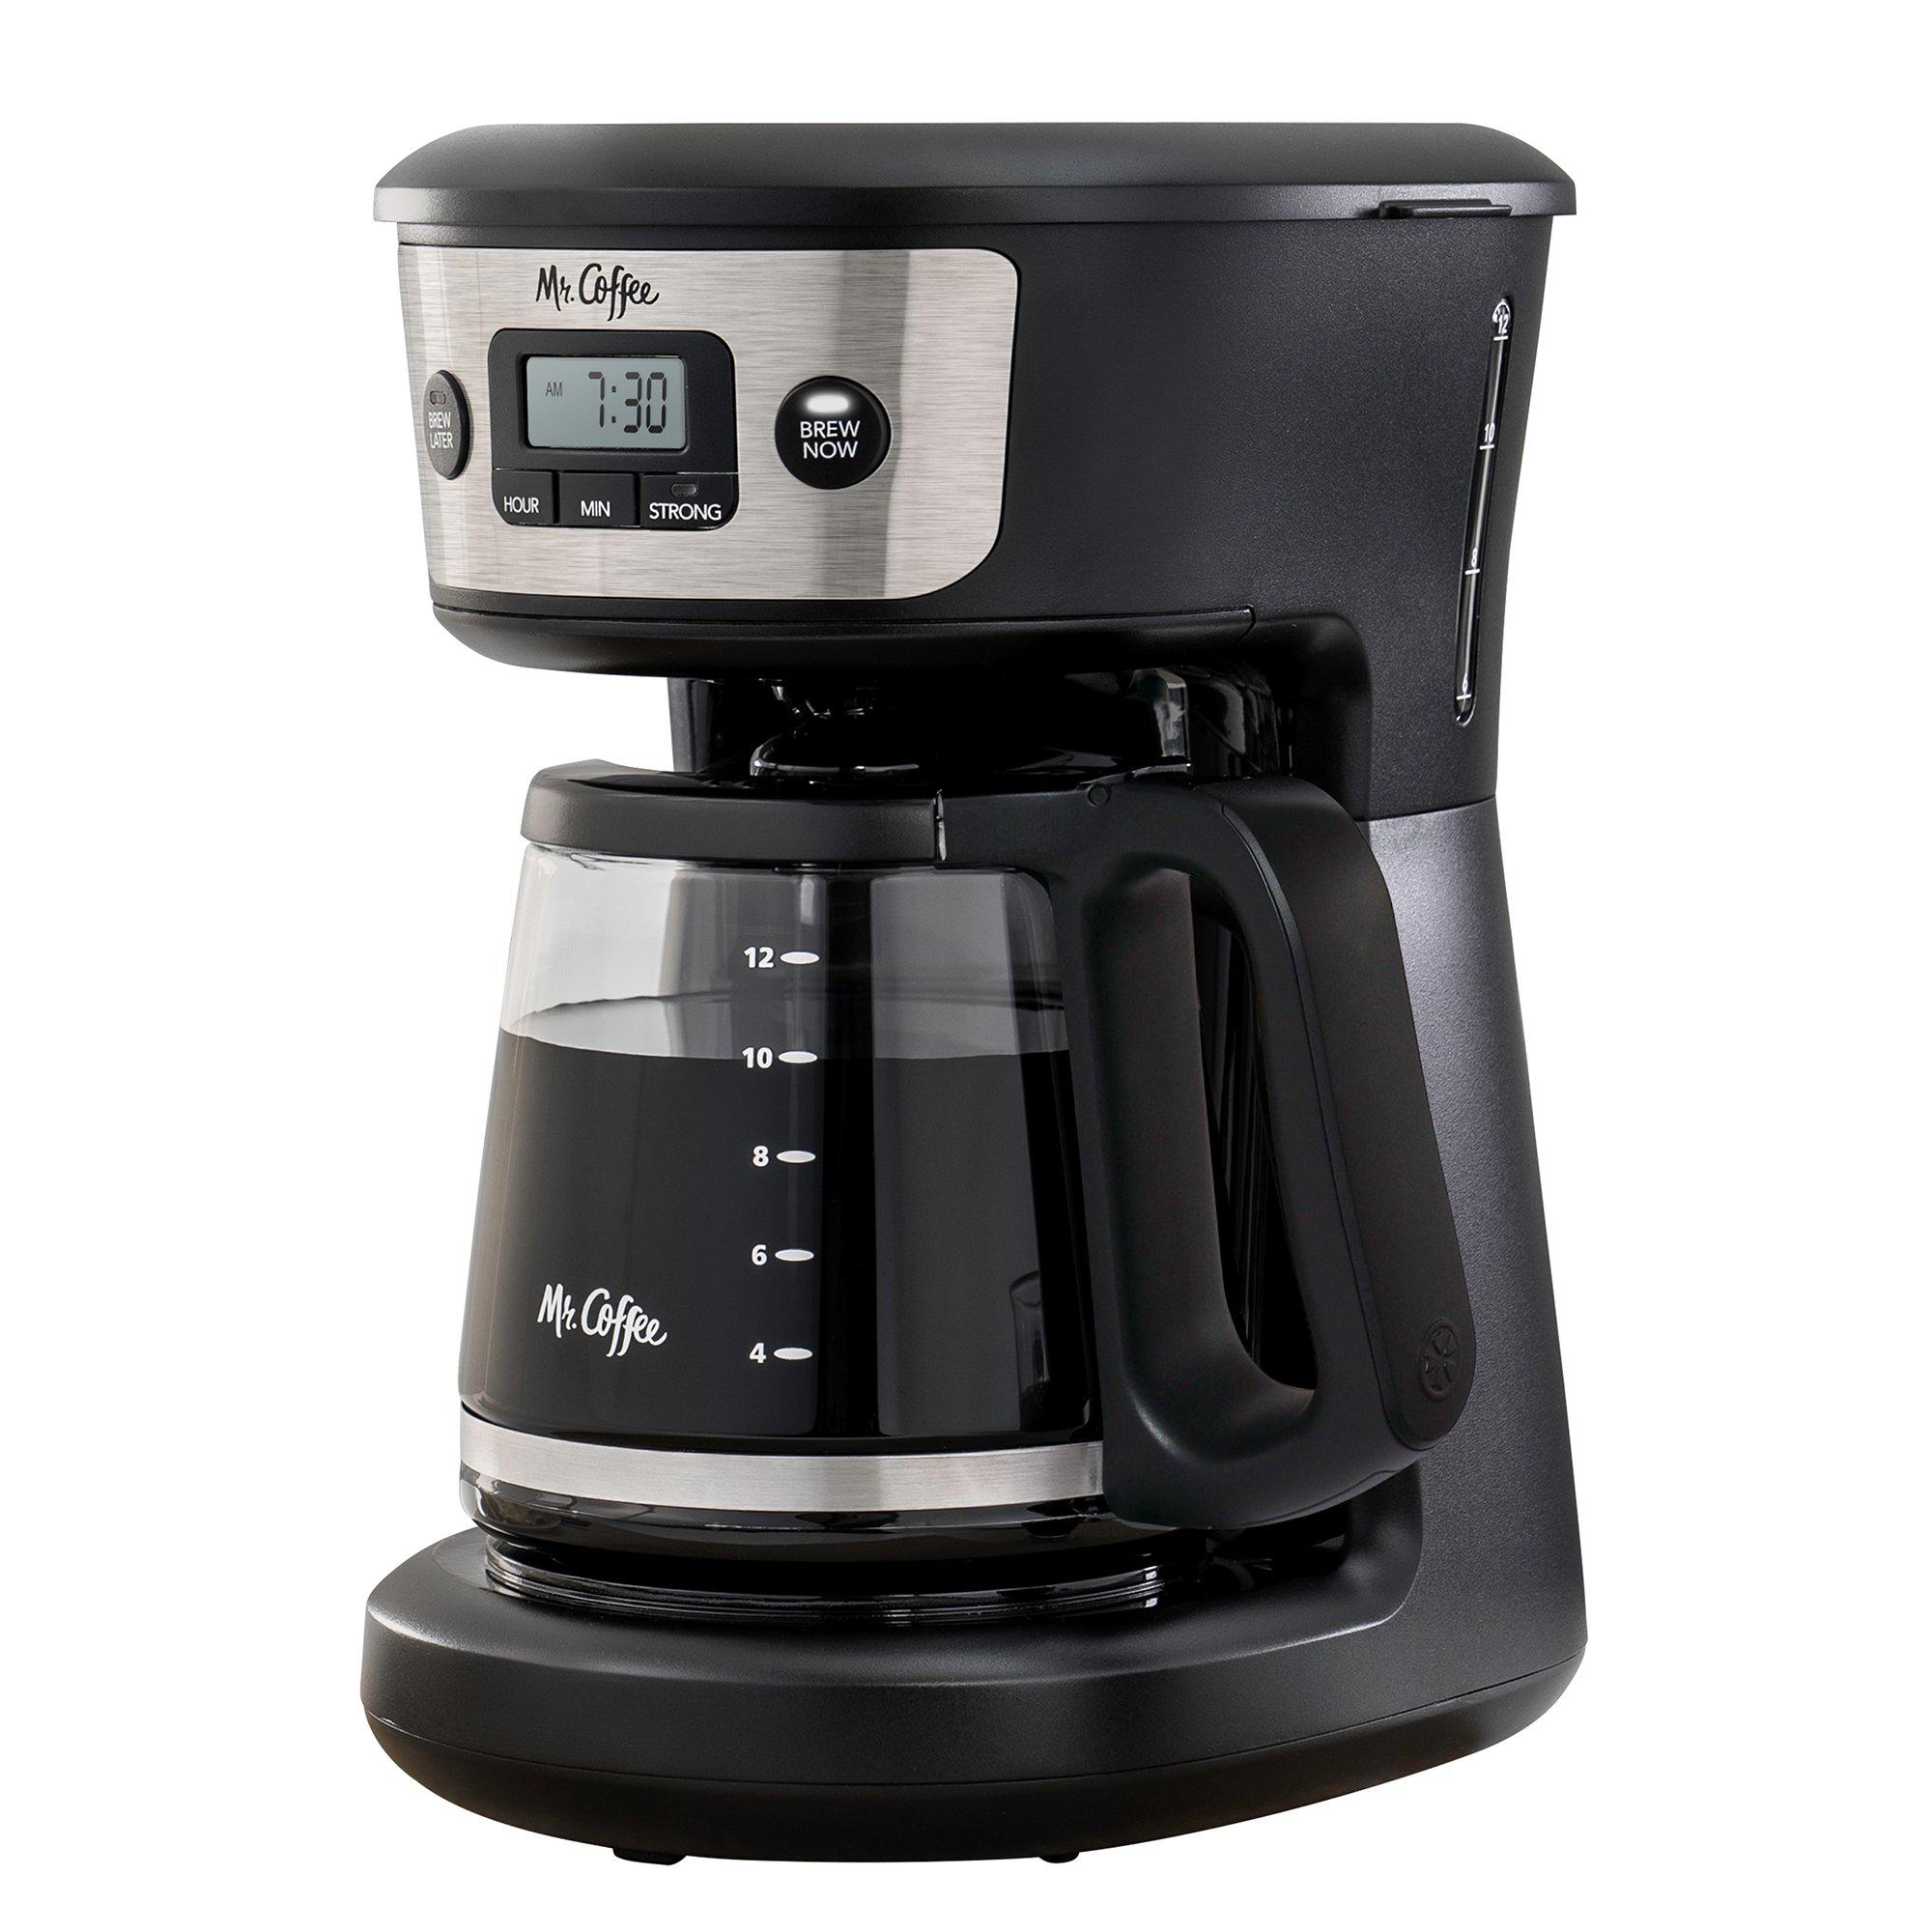 Toastmaster 12 Cup Coffee Maker - 9043014